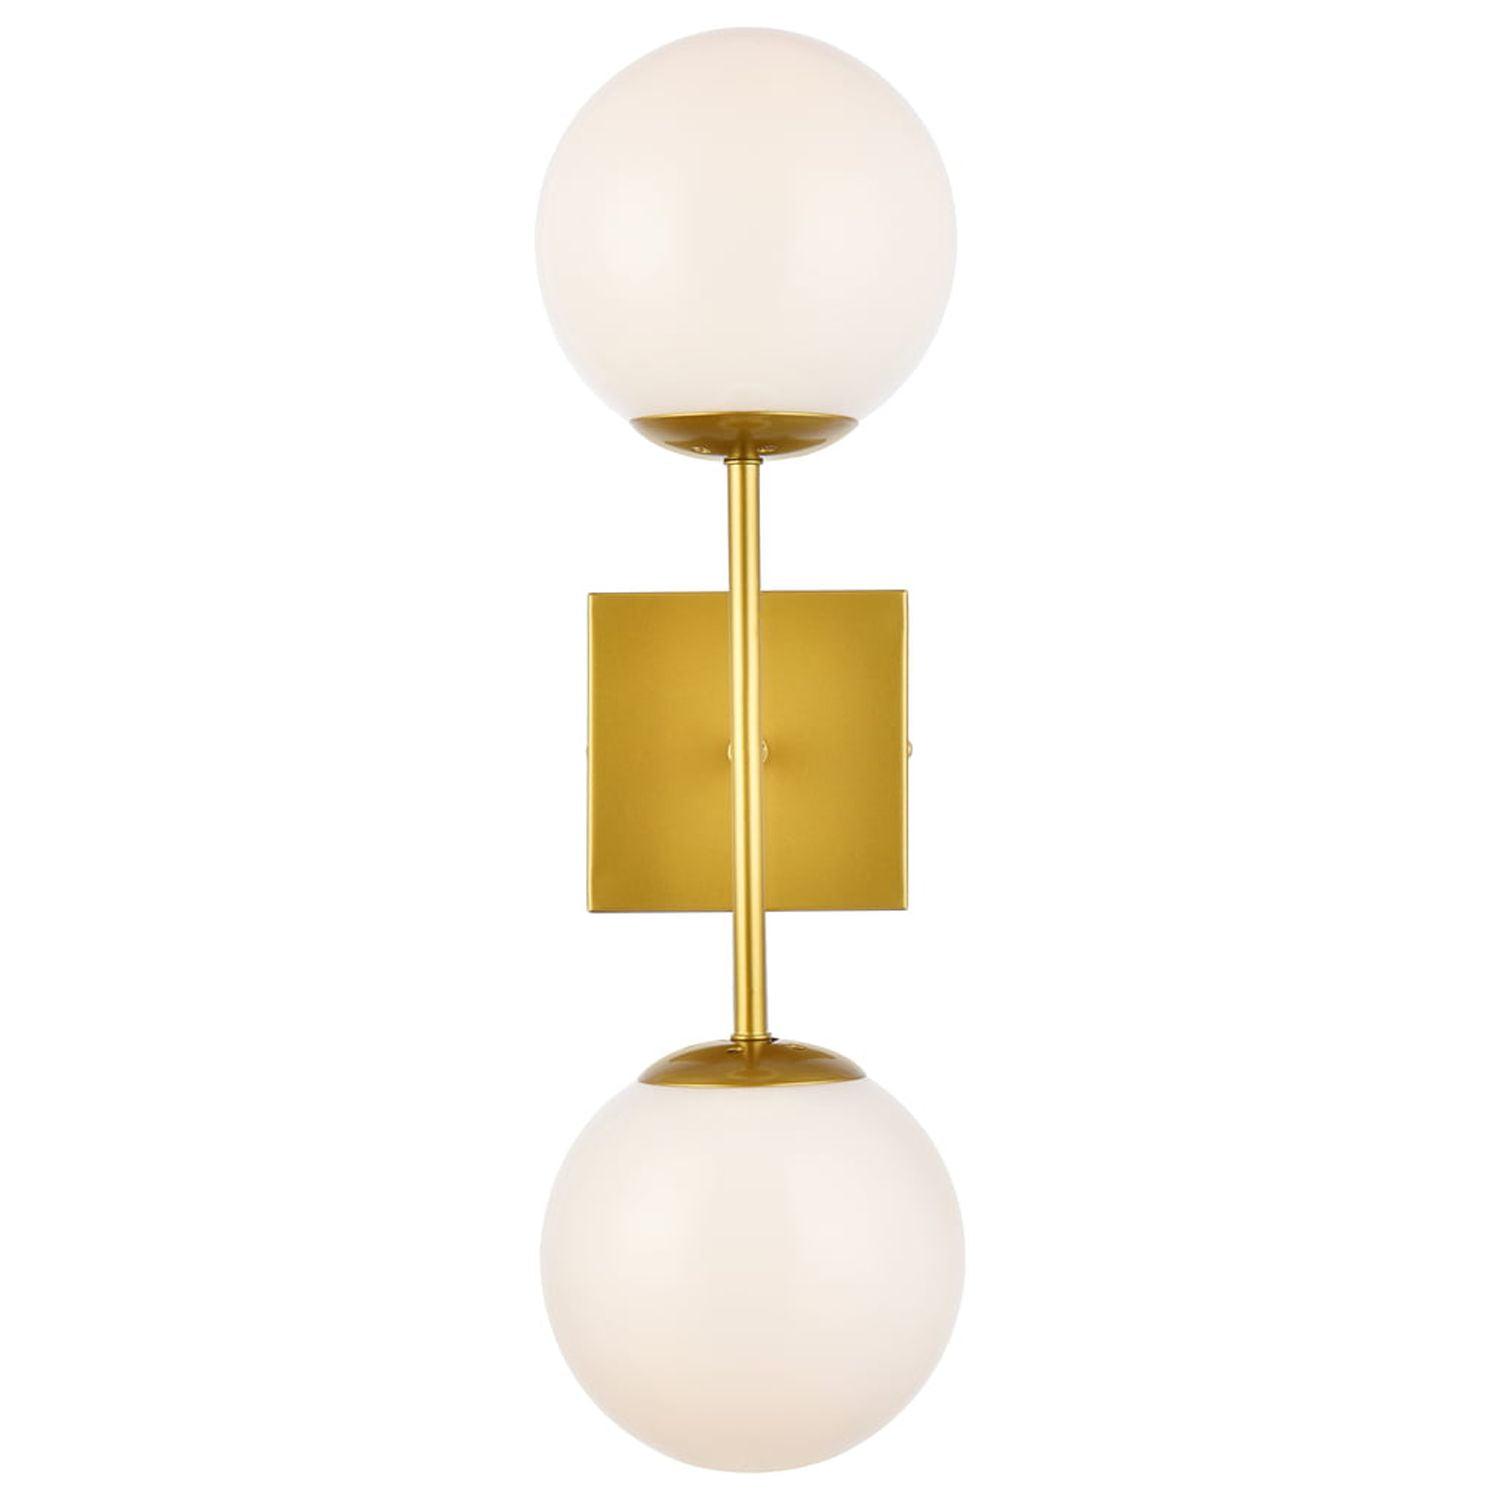 Elegant Neri 20" Dimmable Brass & White Glass Wall Sconce